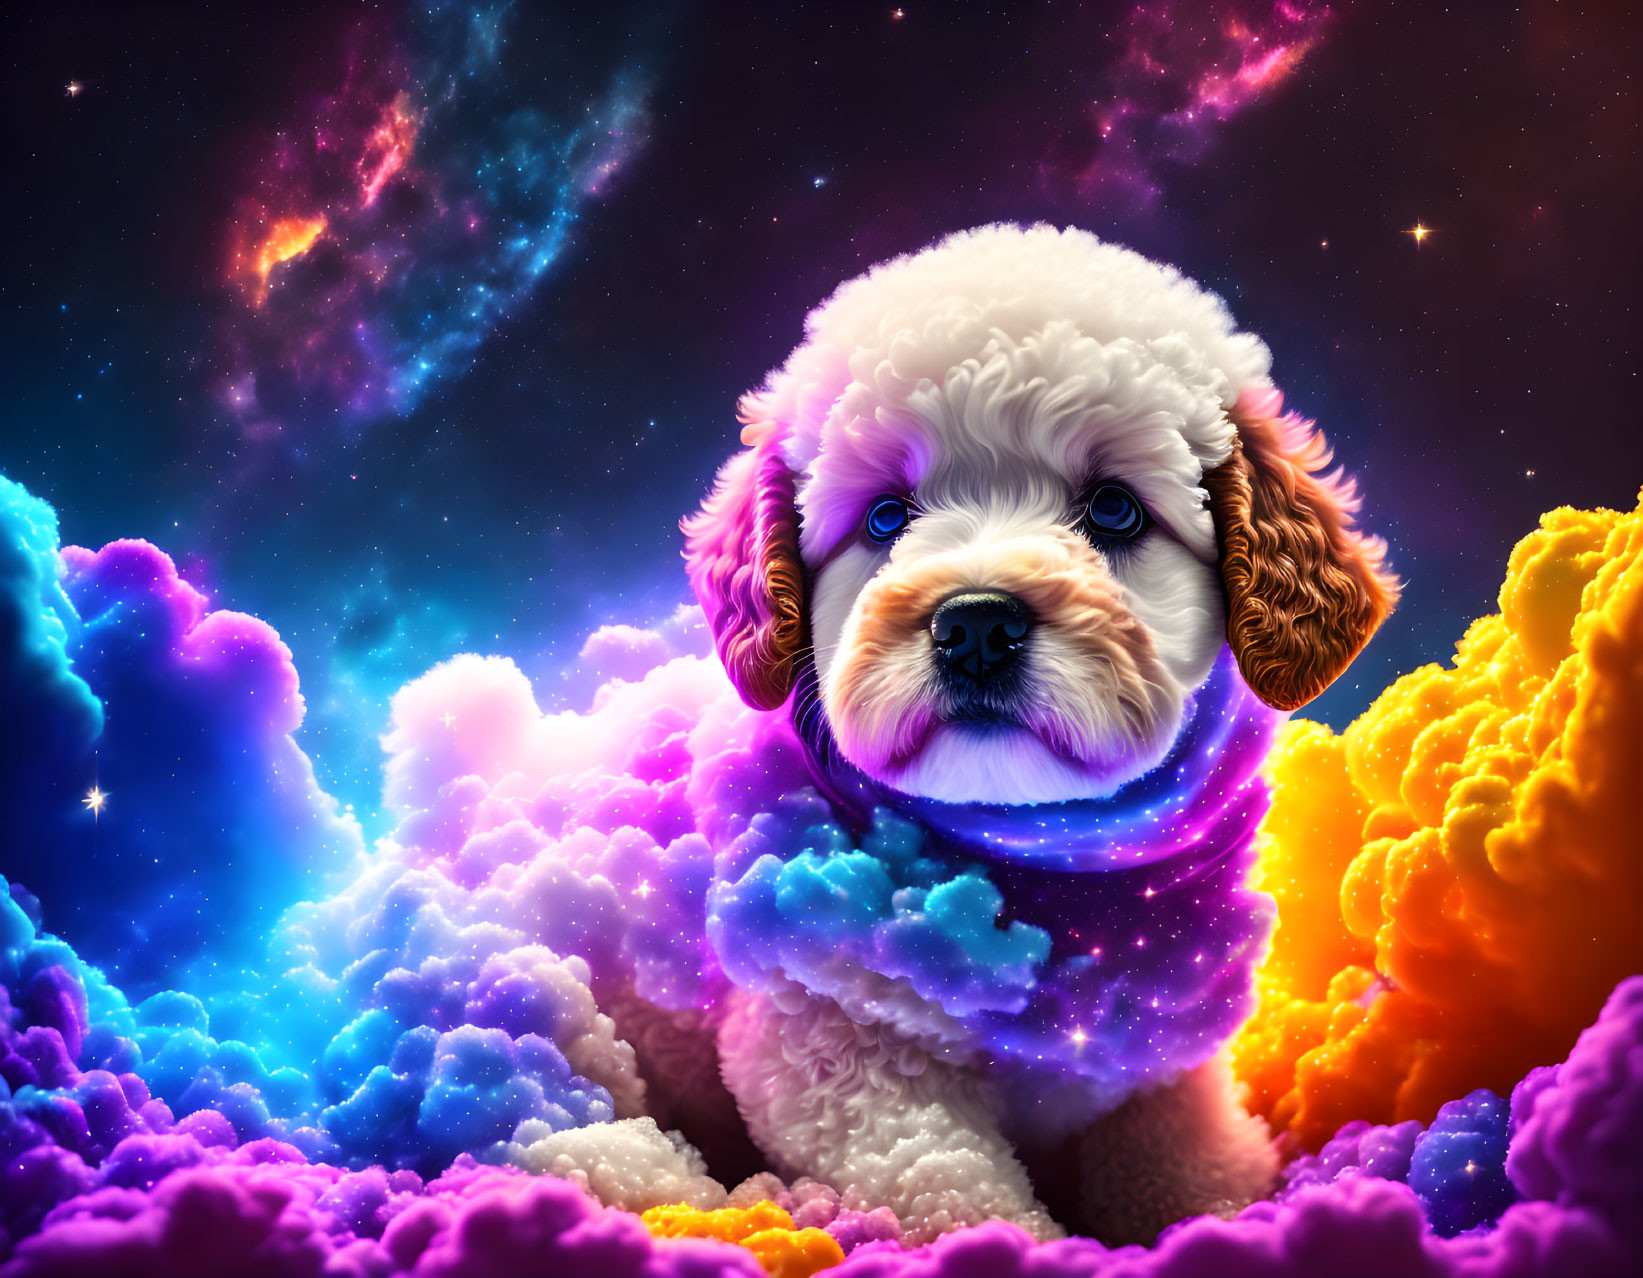 Fluffy Puppy Wearing Scarf in Colorful Cosmic Scene